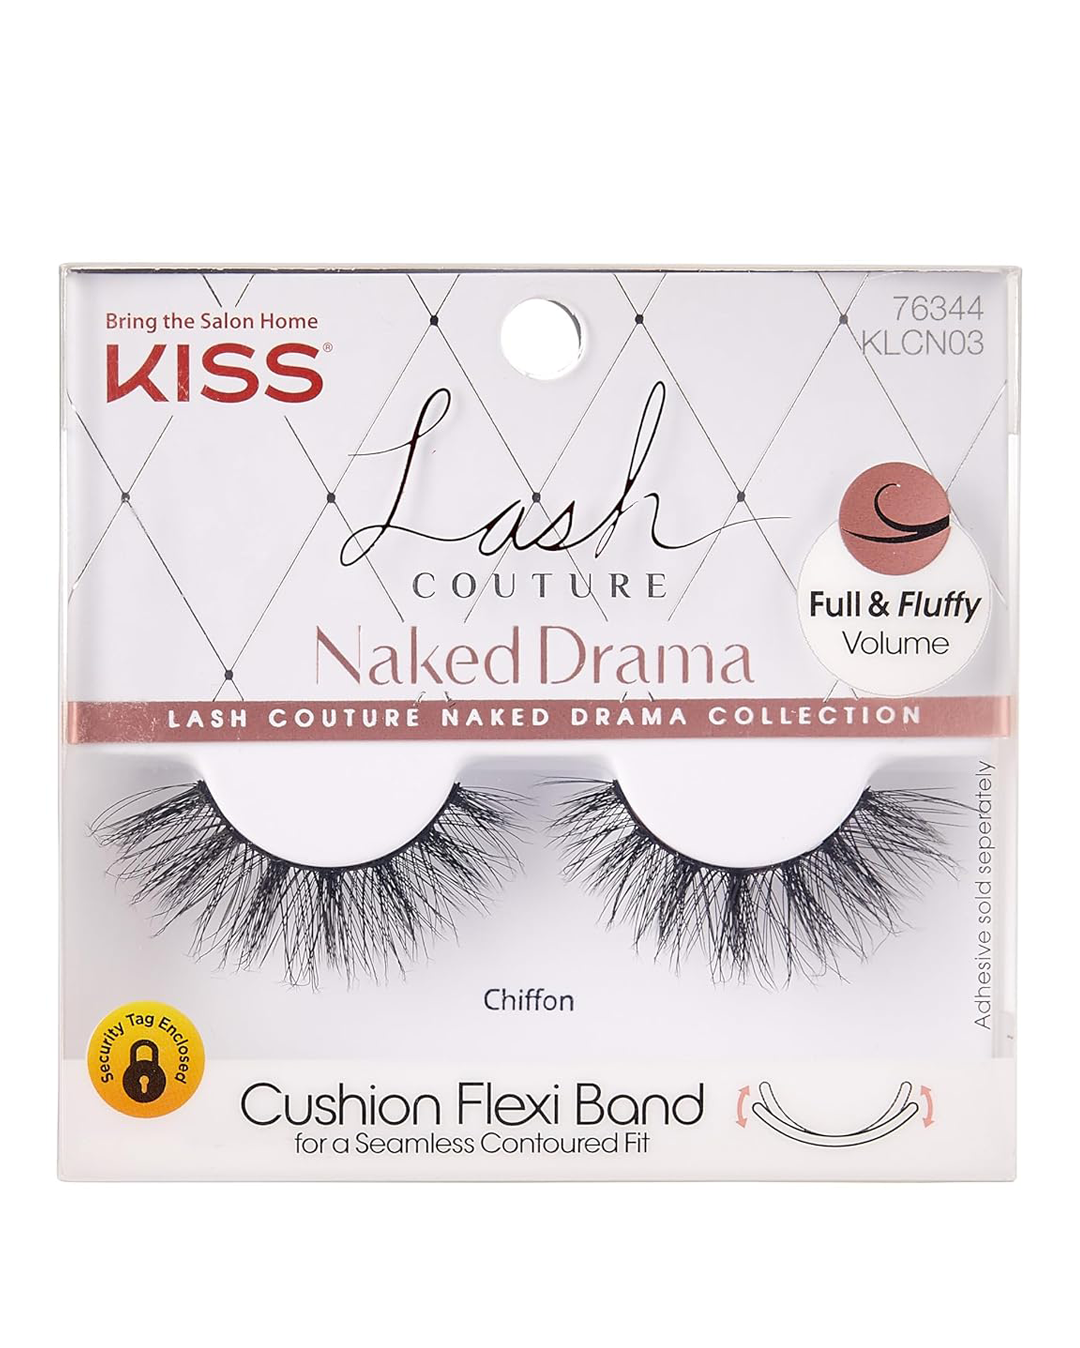 Kiss Lash Couture Naked Drama Collection - (KLCN03)